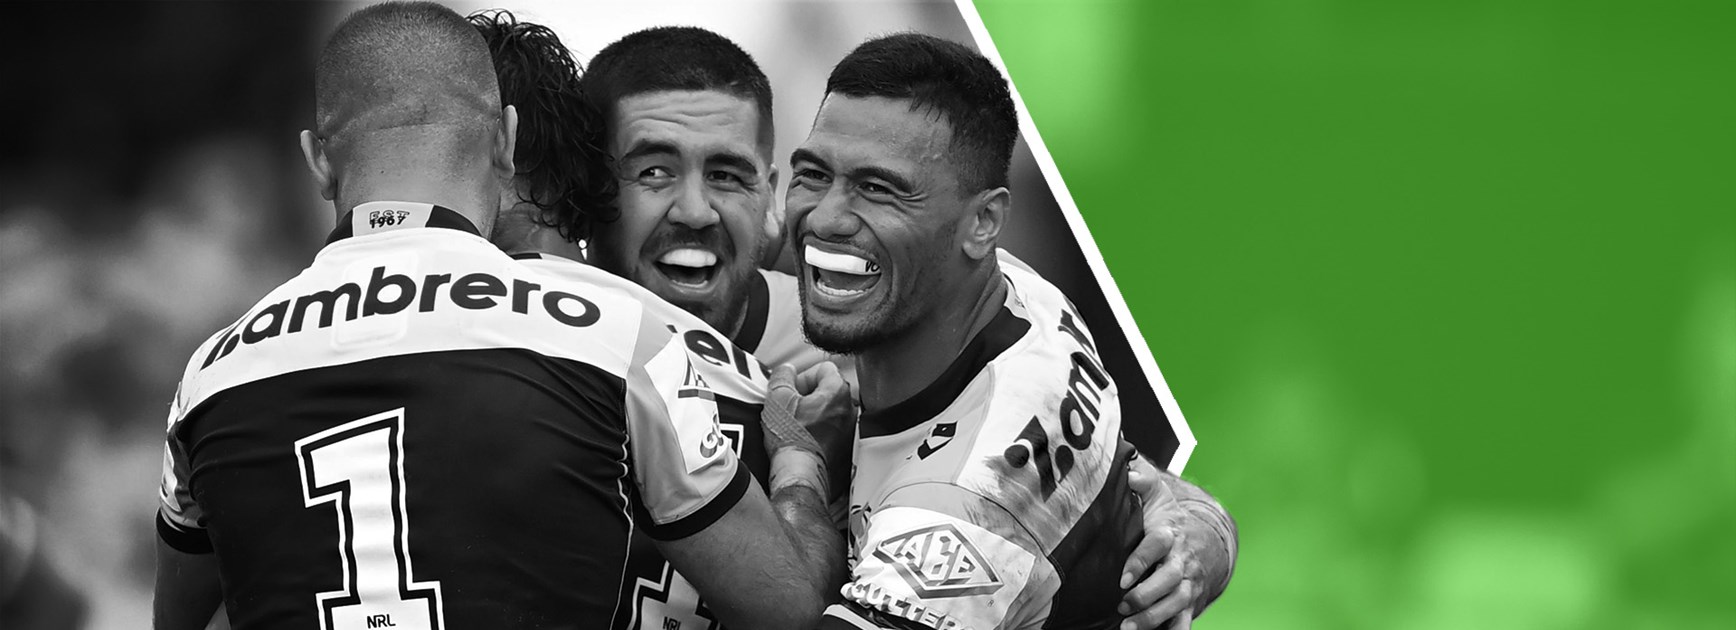 NRL Tipping: Expert tips for Round 3